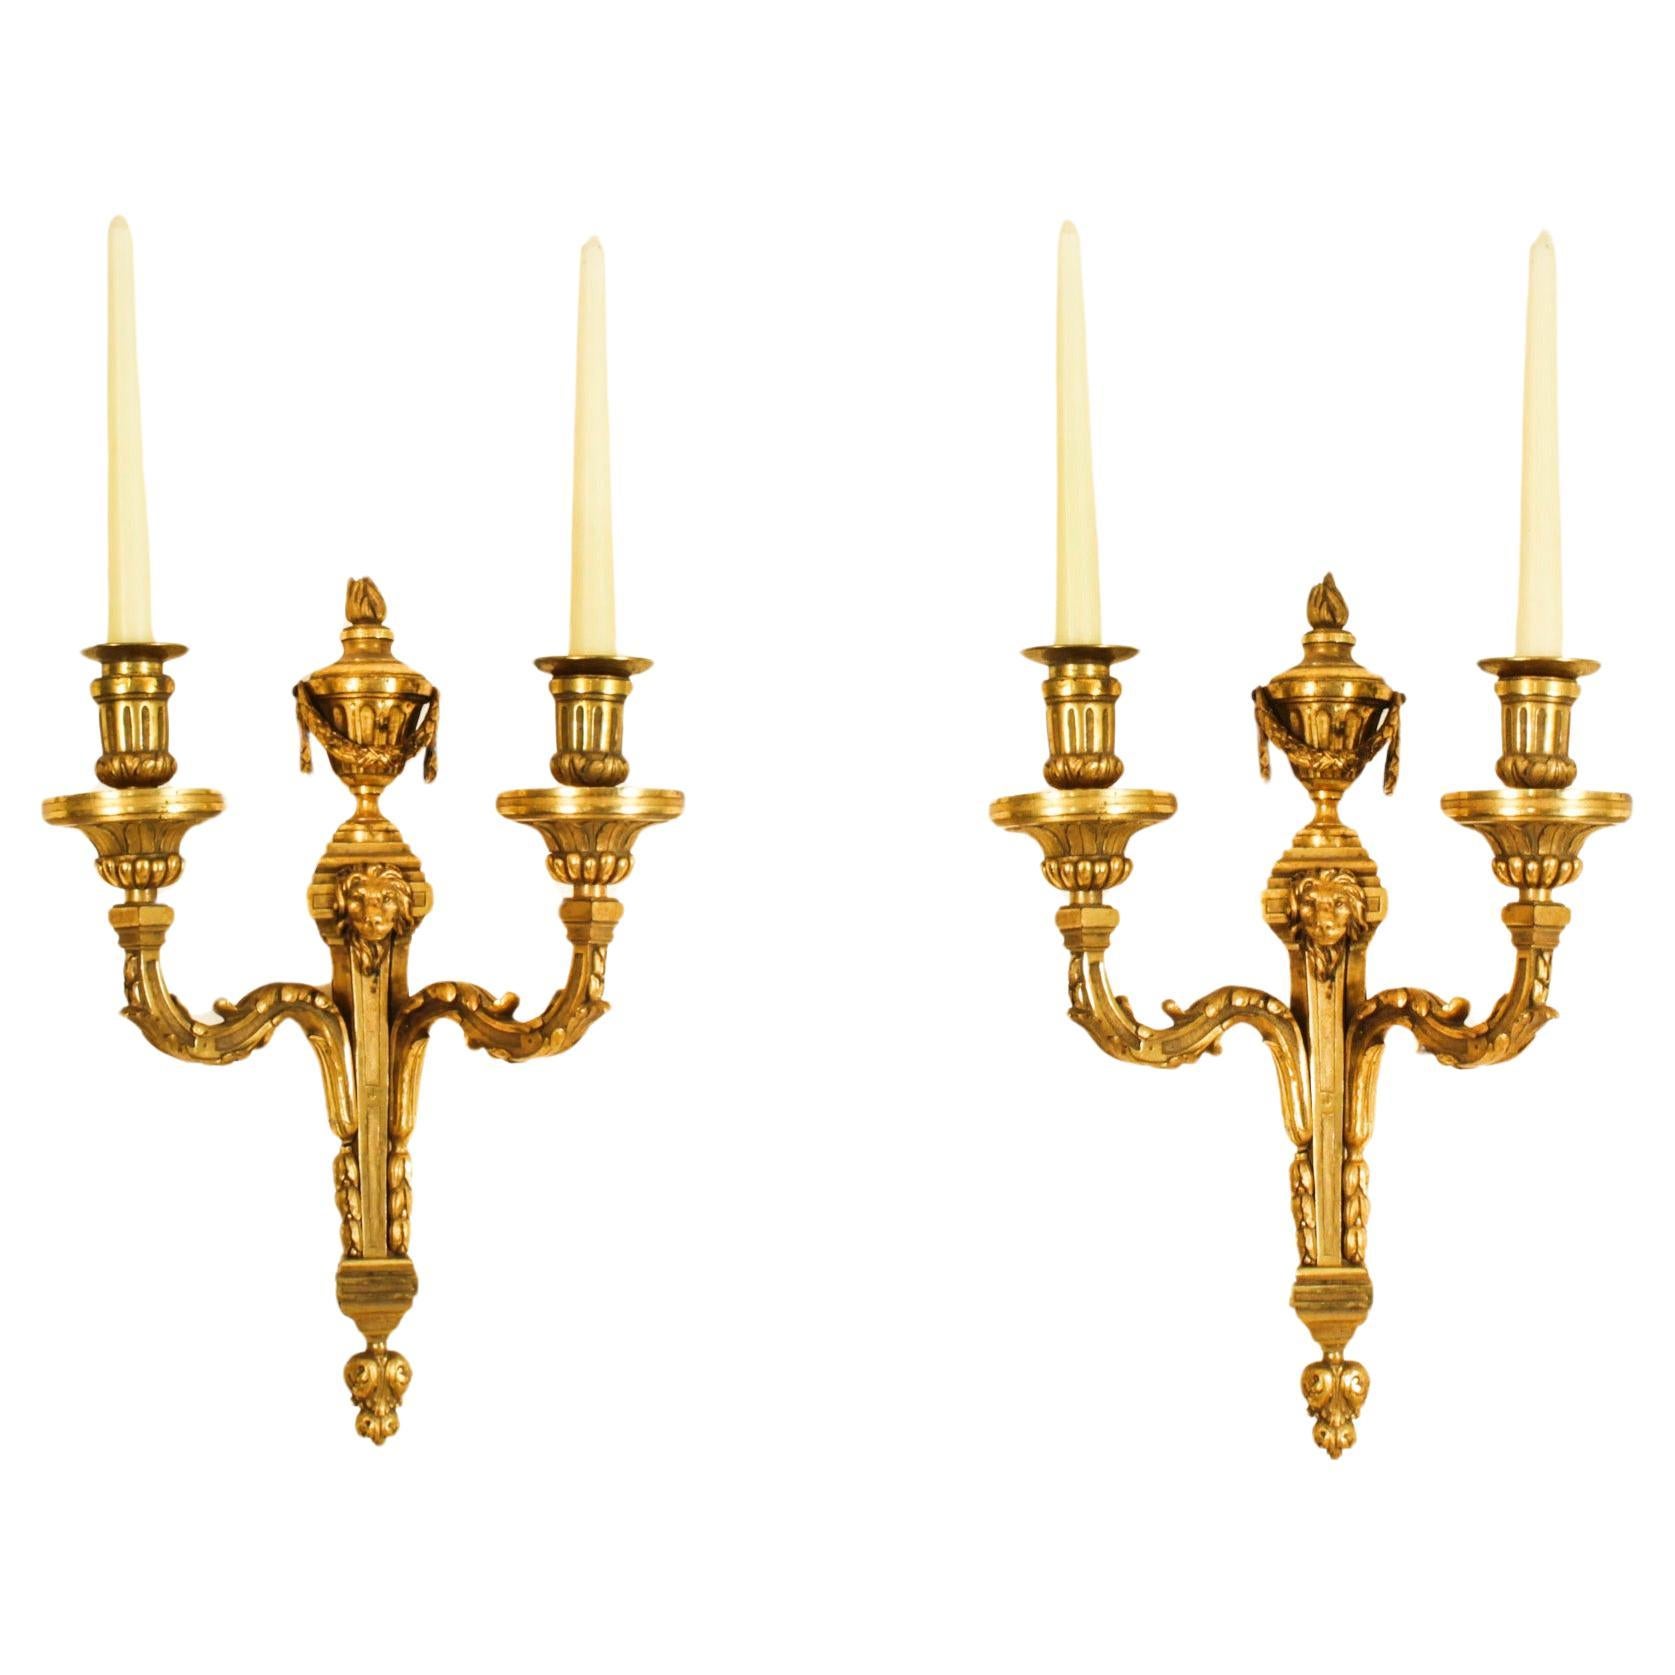 Antique Pair Regency Revival Ormolu Wall Lights Appliques Mid 19th Century For Sale